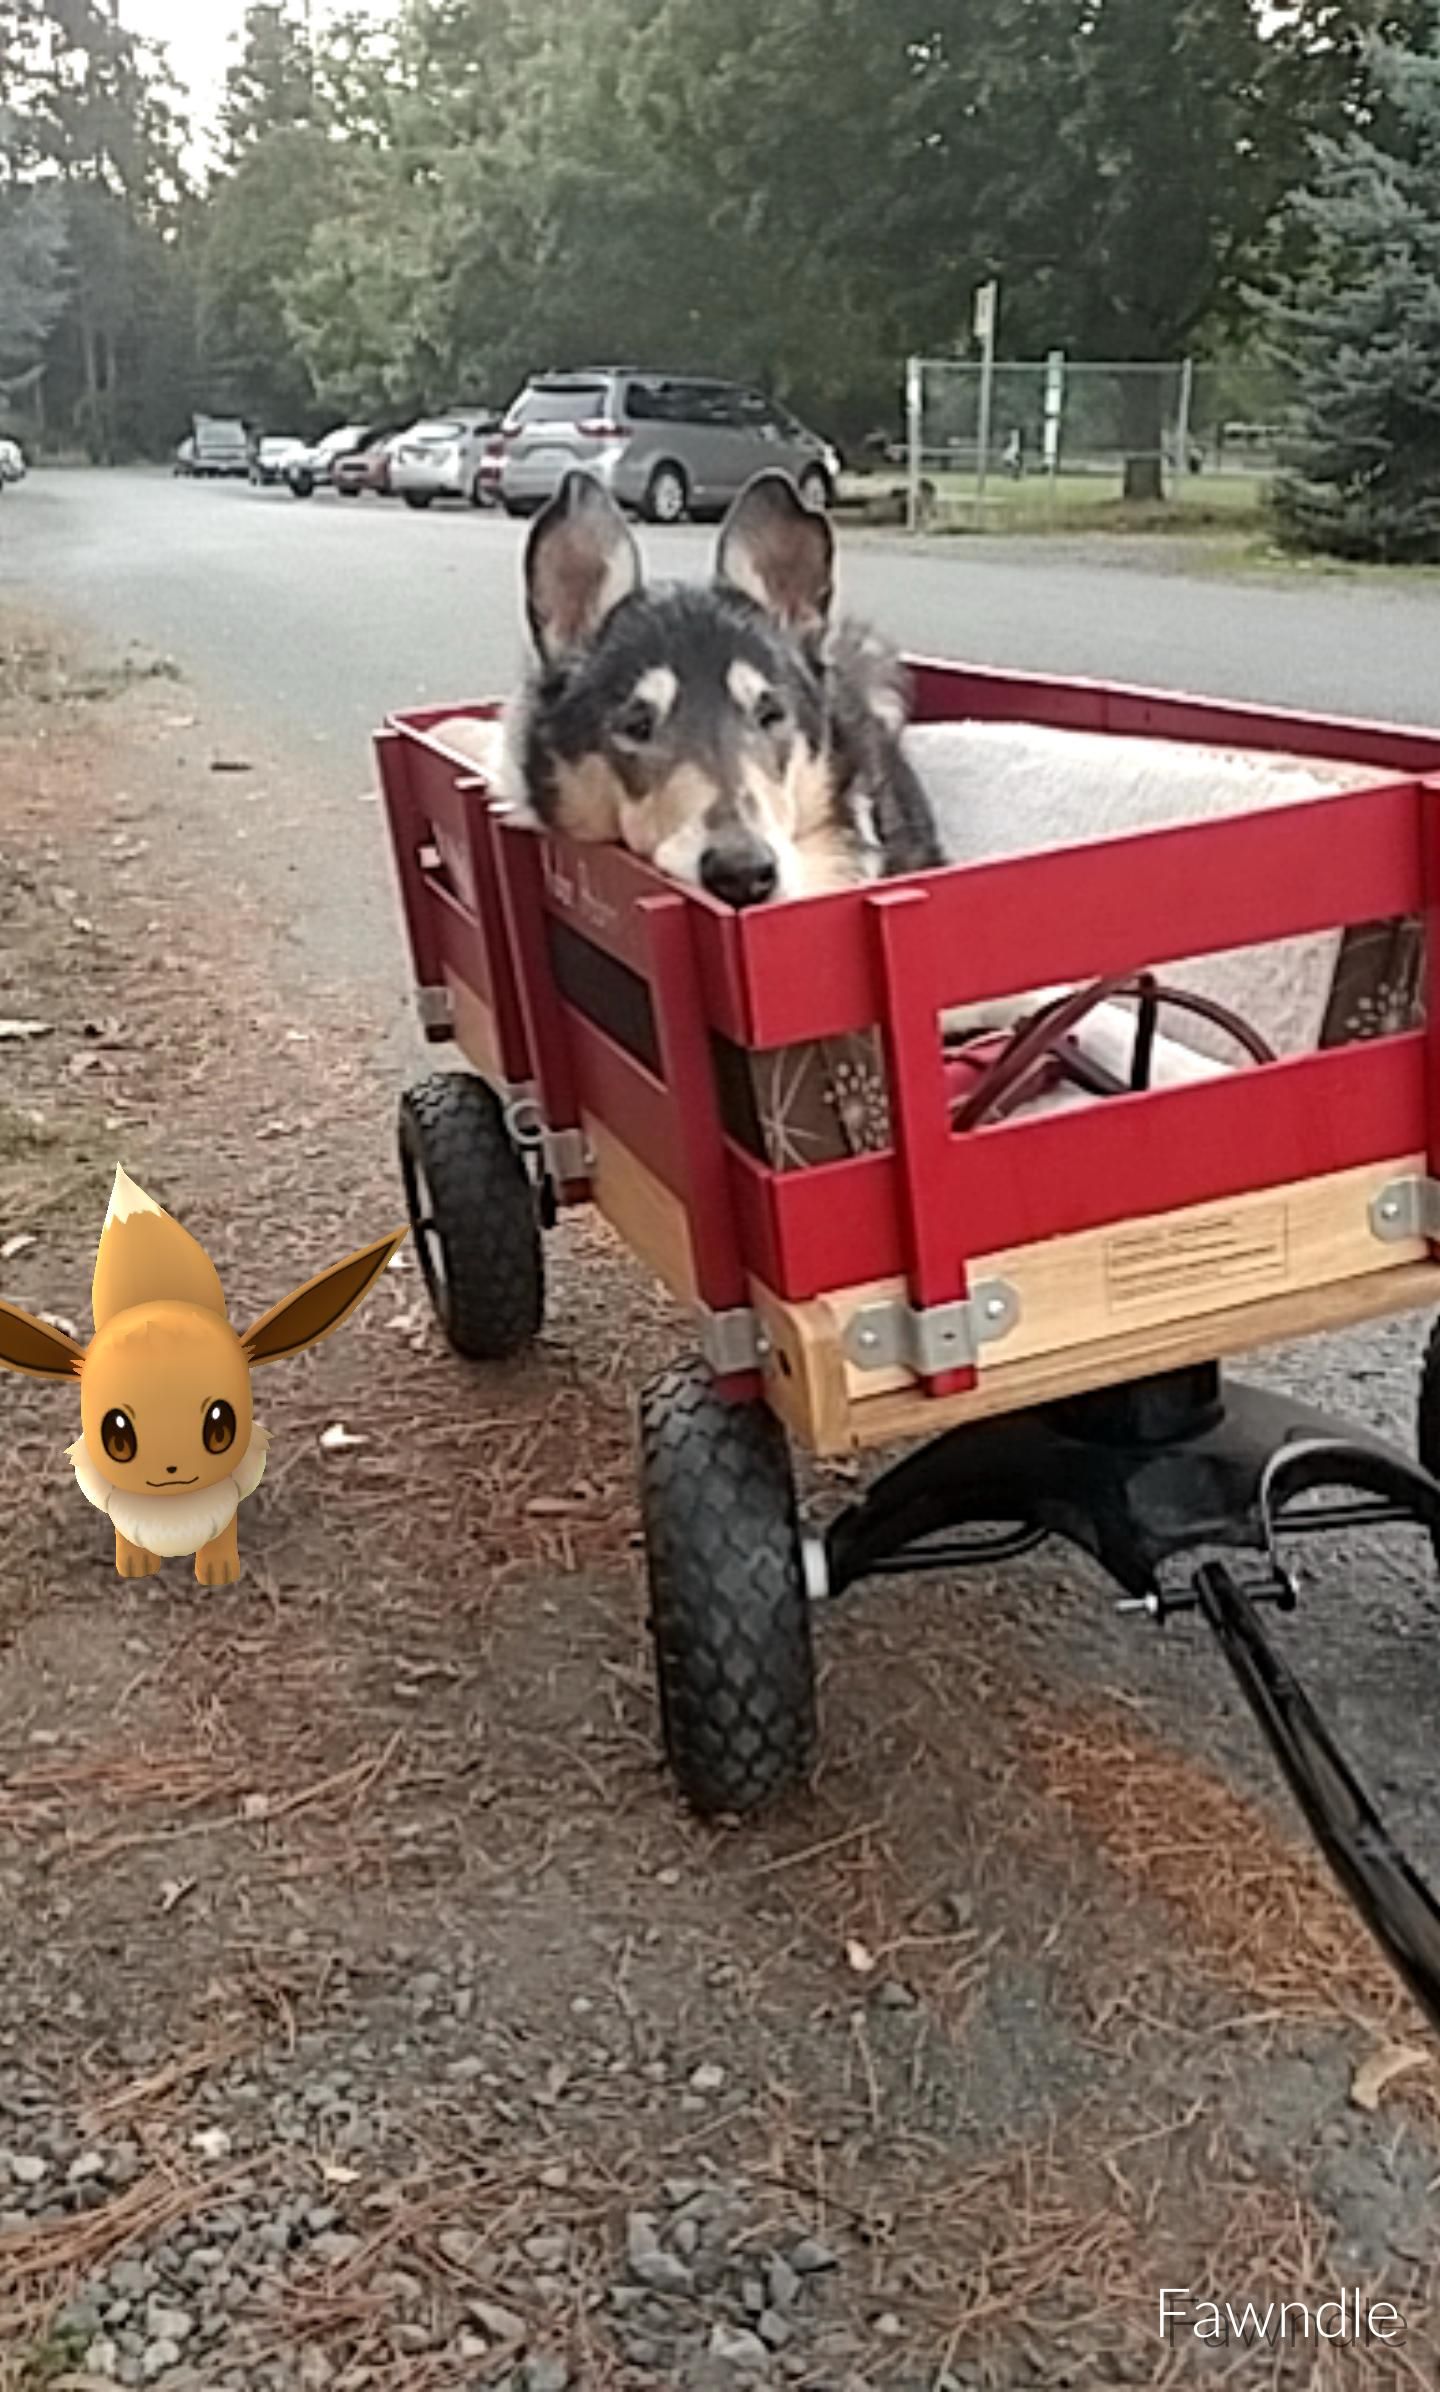 Haven't been able to get far in the game because my walking buddy can't go for more than a few blocks these days. Until yesterday, that is! Three hatches, 7 candies, and counting!